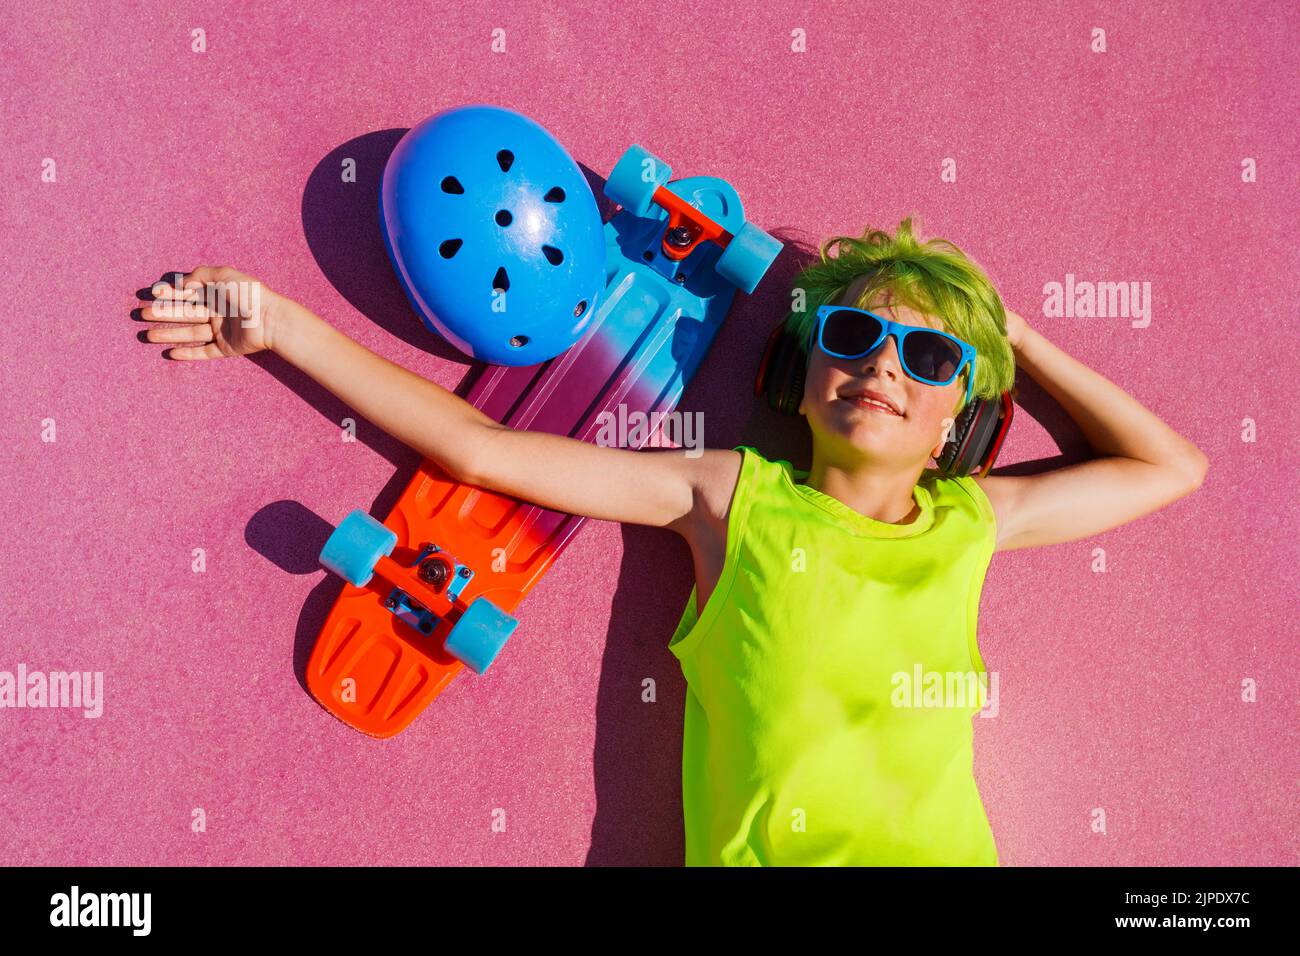 Boy with green hair and skateboard portrait laying at skatepark Stock Photo